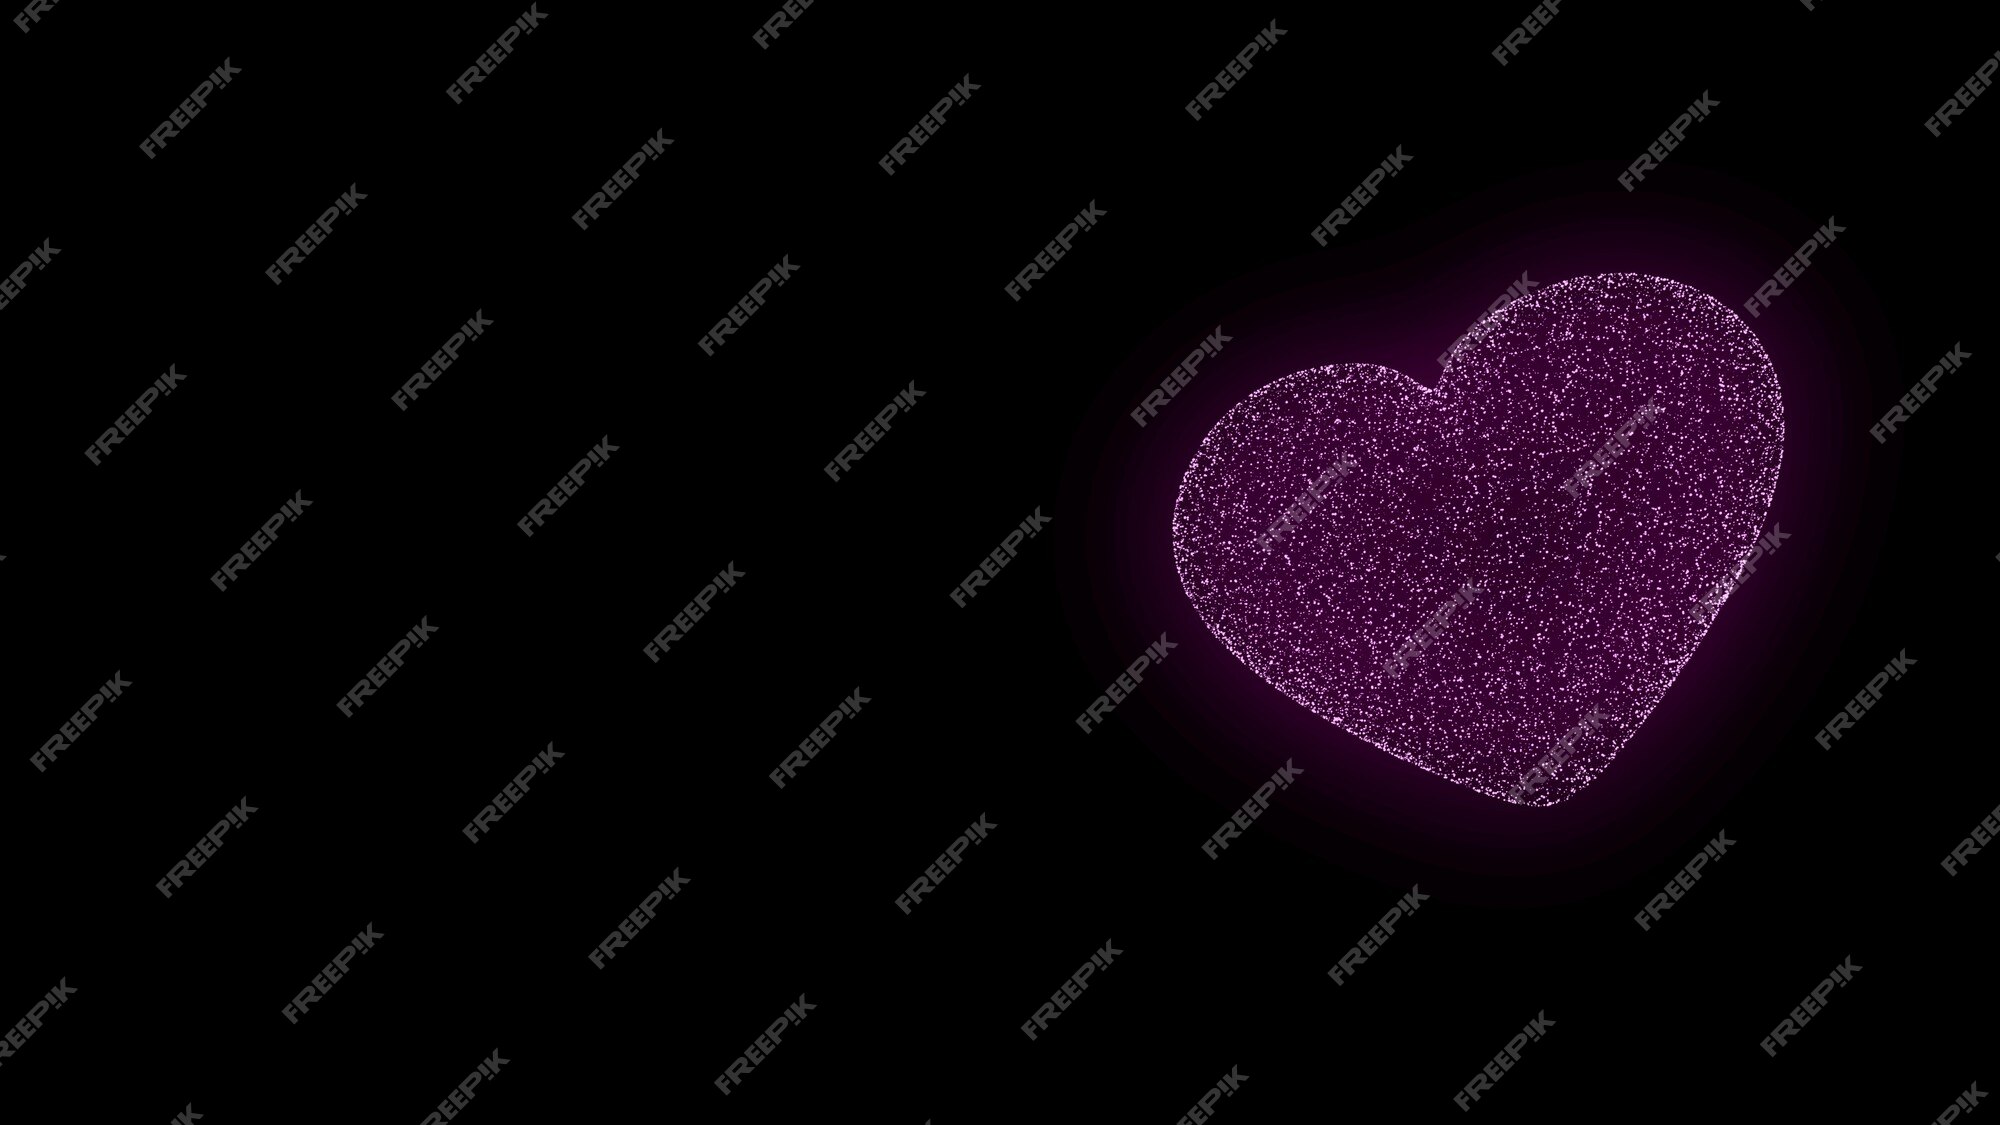 Premium Photo | Abstract black background with neon heart pink glowing heart